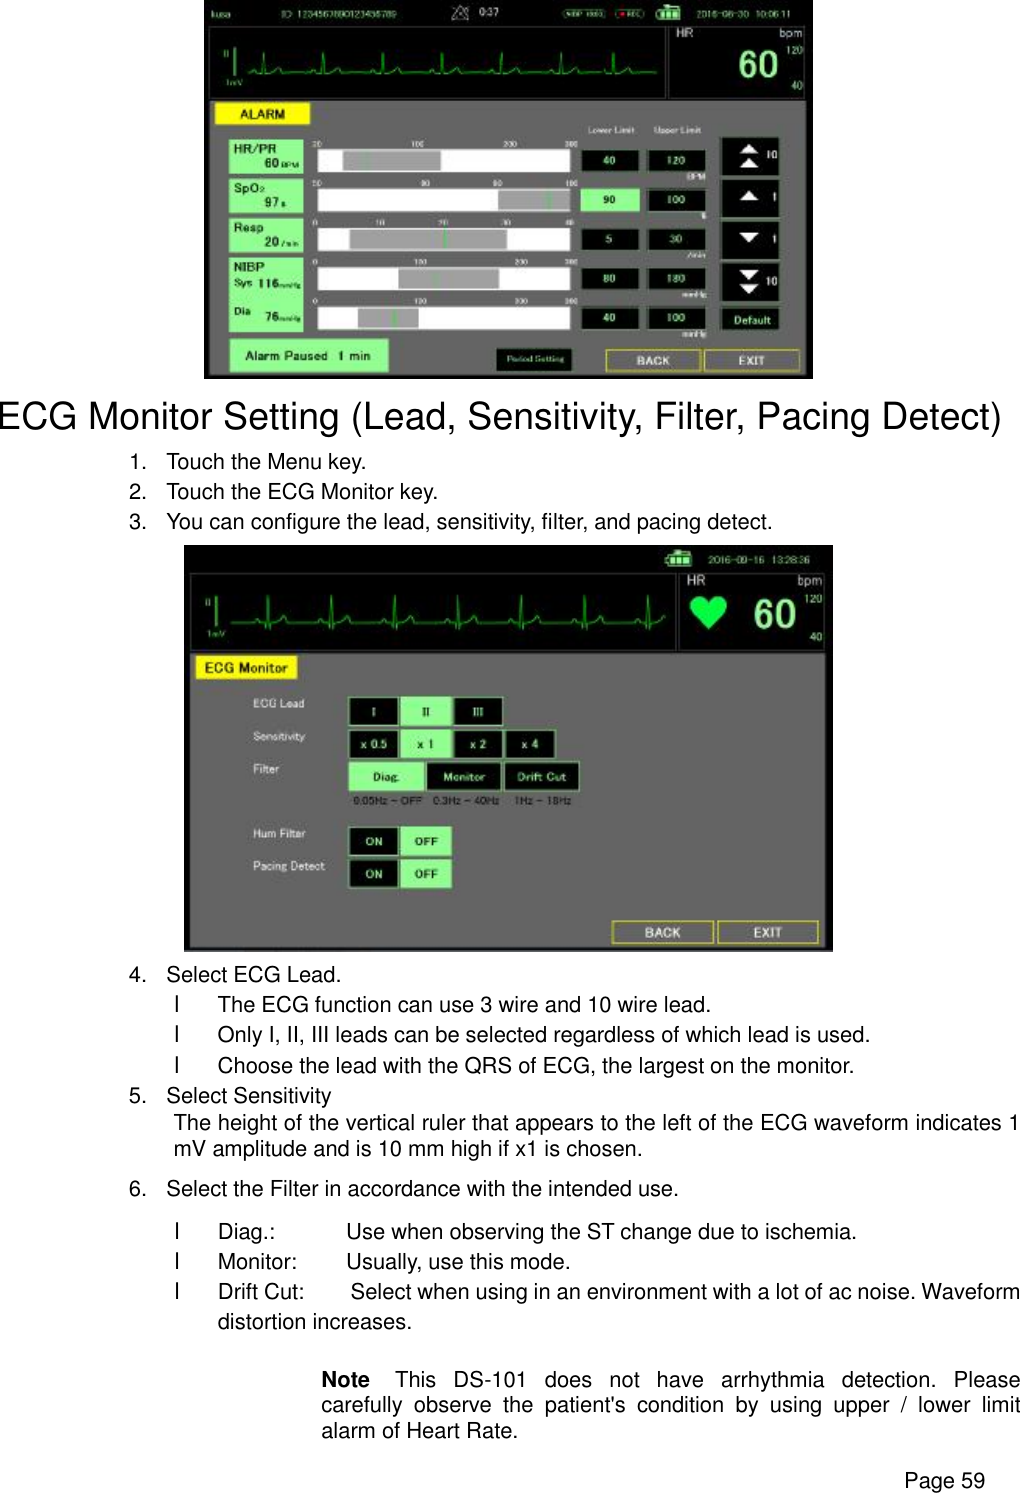      Page 59  ECG Monitor Setting (Lead, Sensitivity, Filter, Pacing Detect) 1. Touch the Menu key. 2. Touch the ECG Monitor key. 3. You can configure the lead, sensitivity, filter, and pacing detect.  4. Select ECG Lead. l The ECG function can use 3 wire and 10 wire lead. l Only I, II, III leads can be selected regardless of which lead is used. l Choose the lead with the QRS of ECG, the largest on the monitor. 5. Select Sensitivity The height of the vertical ruler that appears to the left of the ECG waveform indicates 1 mV amplitude and is 10 mm high if x1 is chosen. 6. Select the Filter in accordance with the intended use. l Diag.:  Use when observing the ST change due to ischemia. l Monitor: Usually, use this mode. l Drift Cut: Select when using in an environment with a lot of ac noise. Waveform       distortion increases.  Note  This DS-101 does not have arrhythmia detection. Please carefully observe the patient&apos;s condition by using upper / lower limit alarm of Heart Rate. 